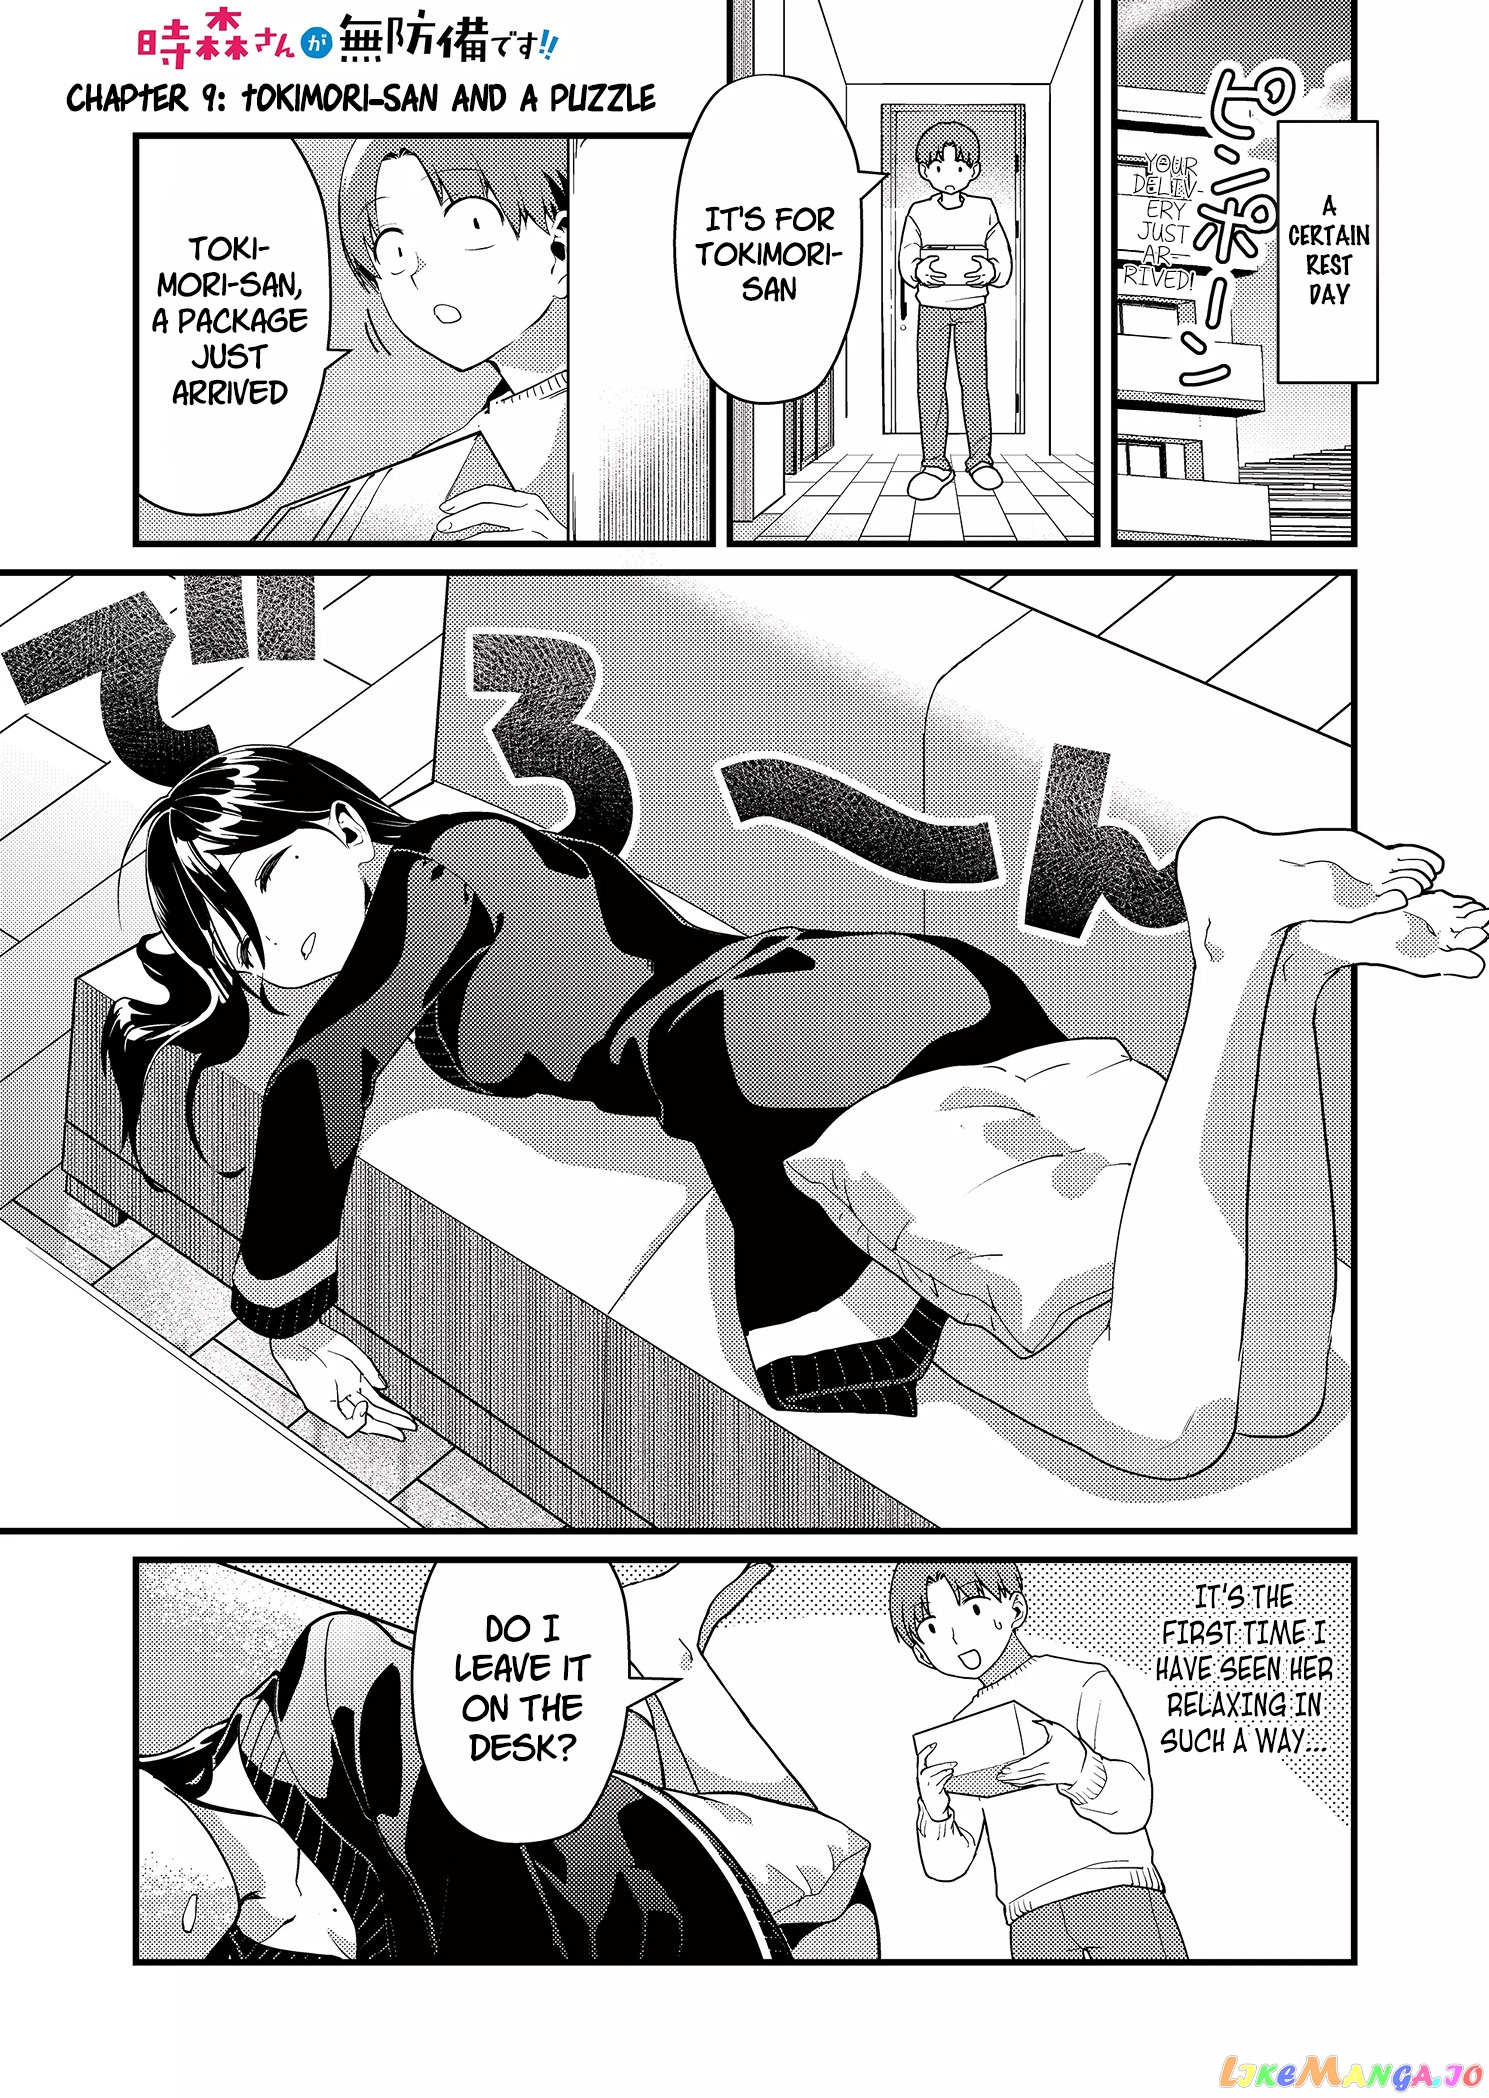 Tokimori-san Is Completely Defenseless!! chapter 9 - page 2